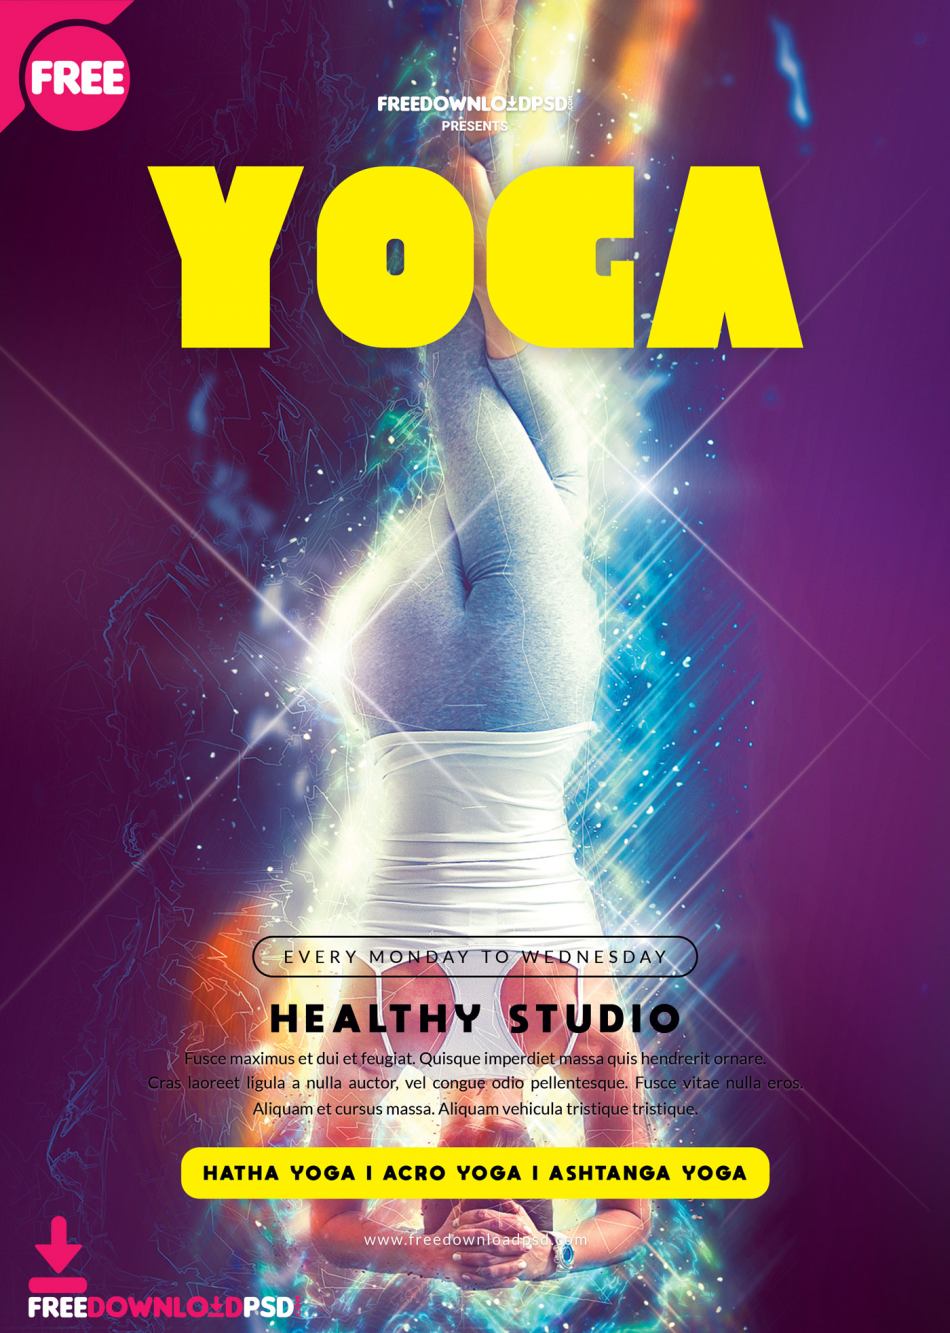 Free Yoga Flyer Template Psd Free Psd Templates